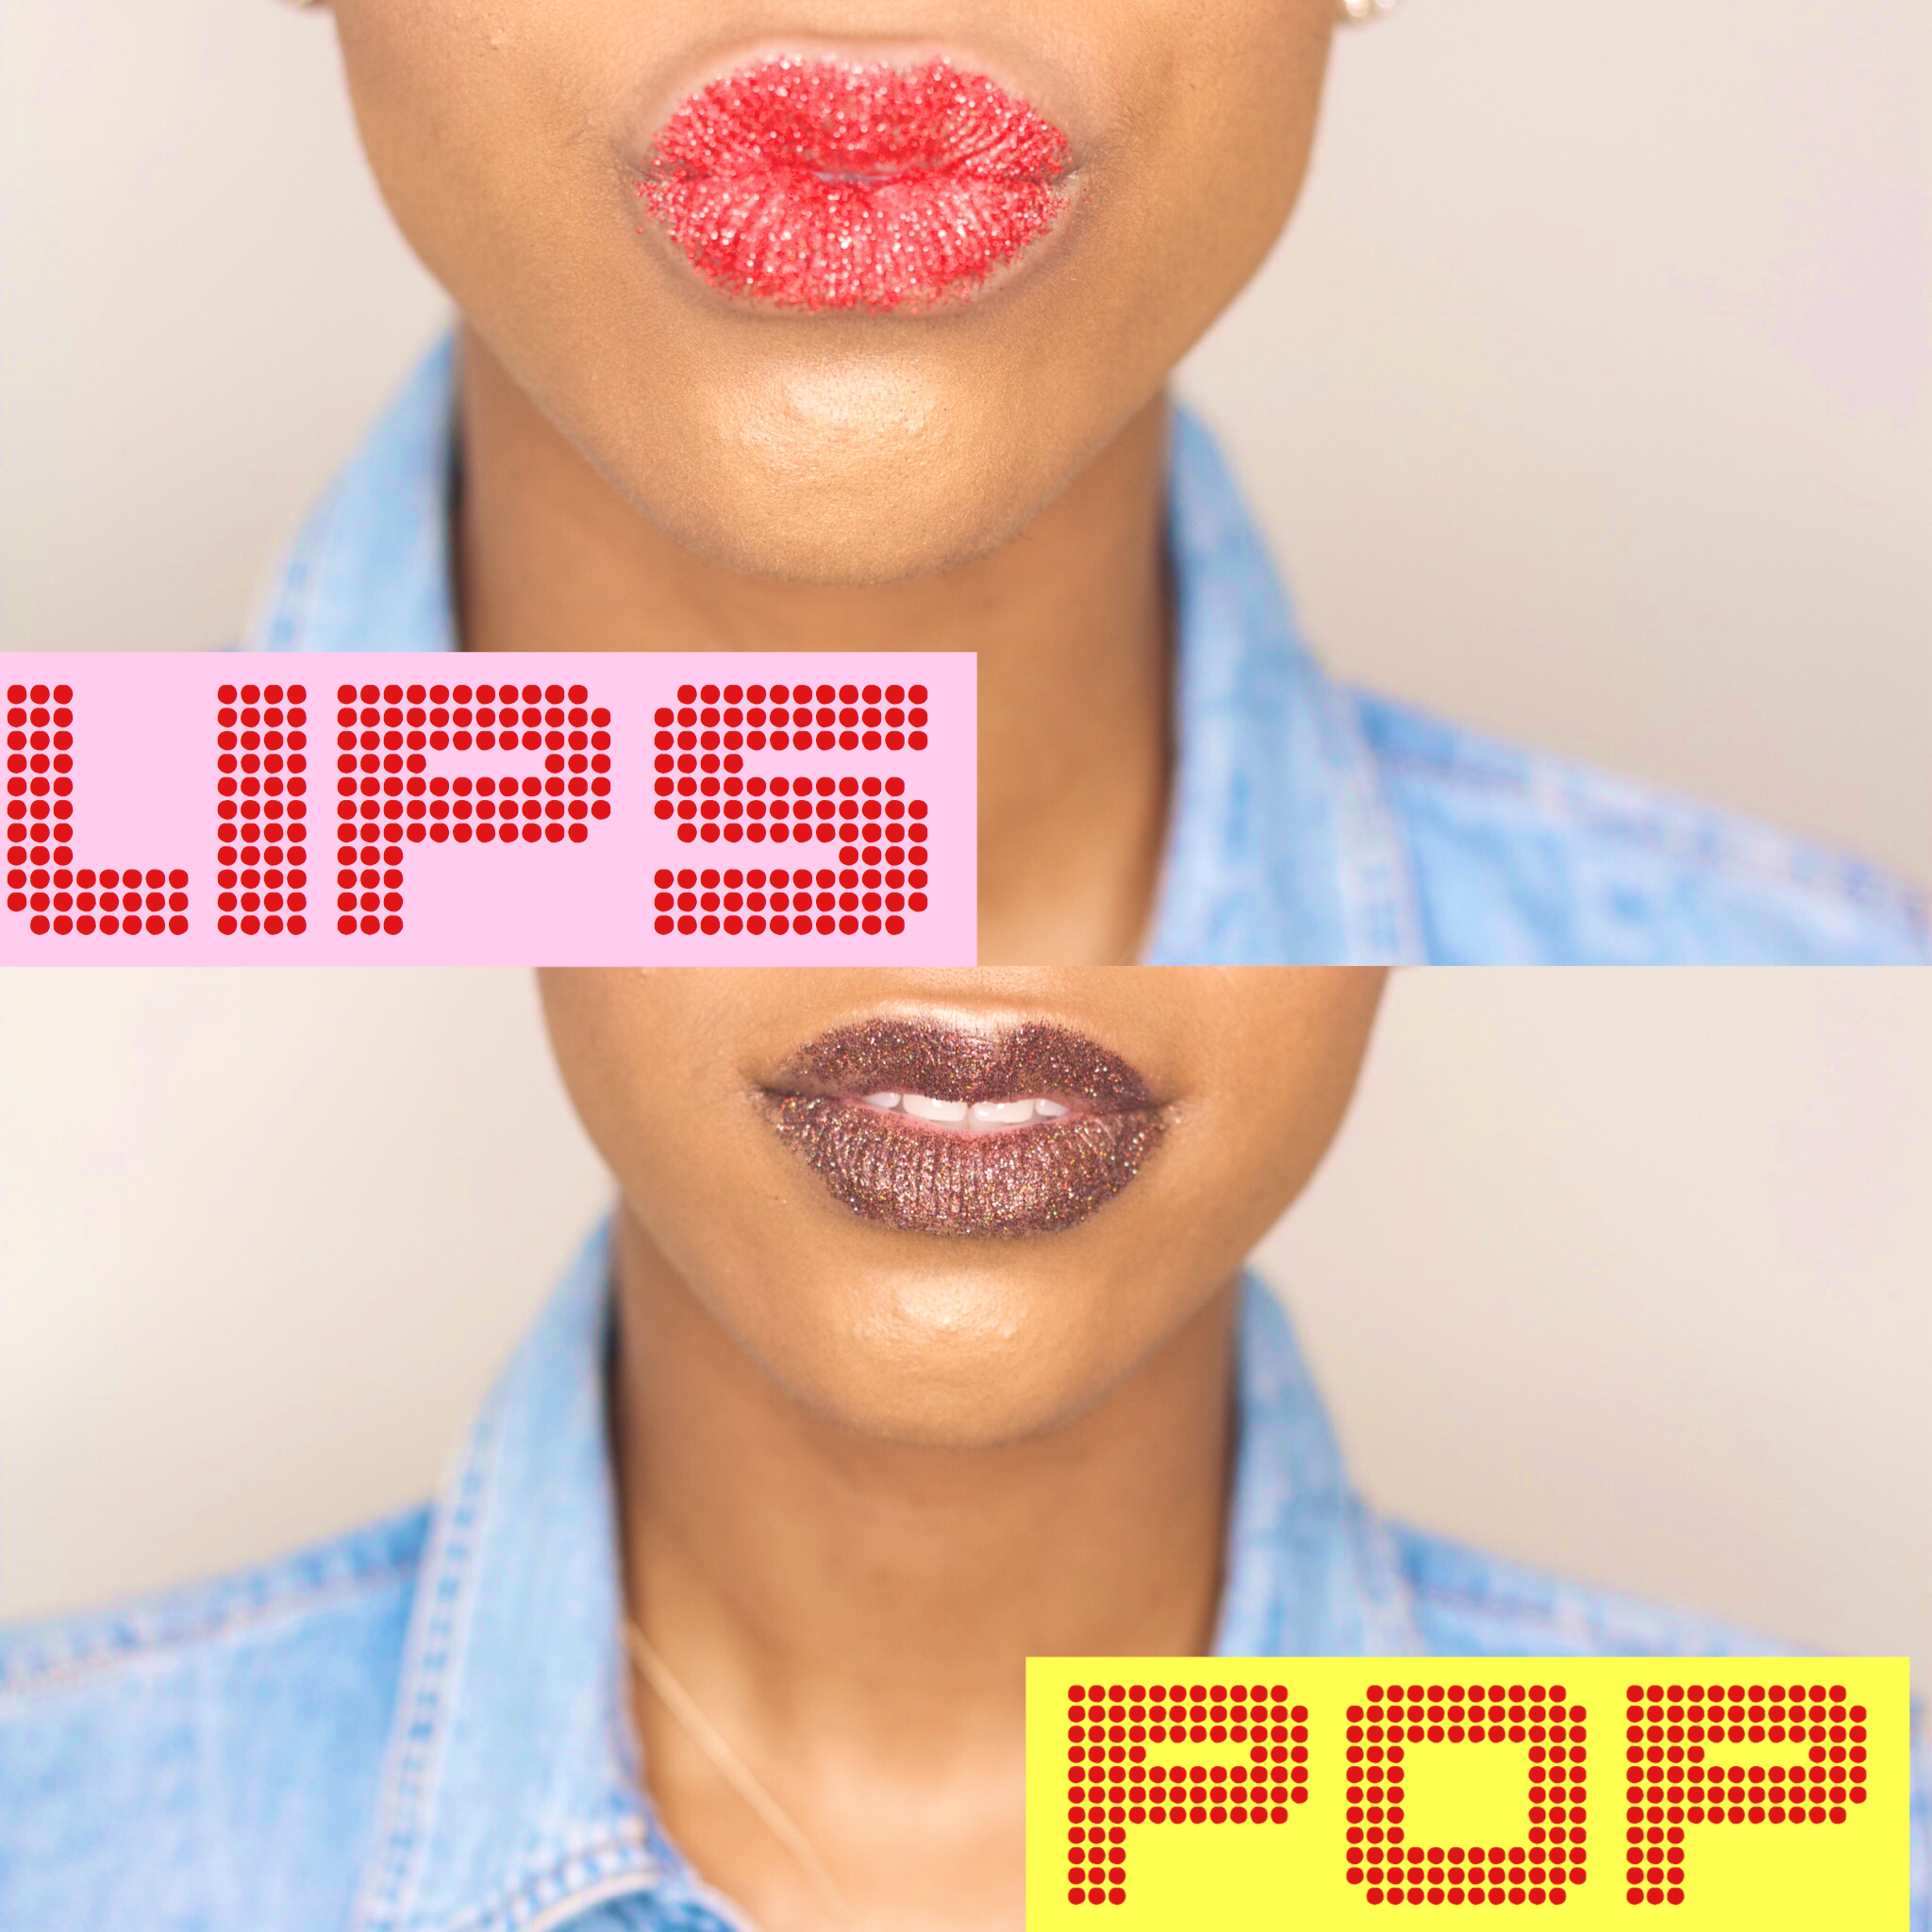 How To Make Your Lips Pop